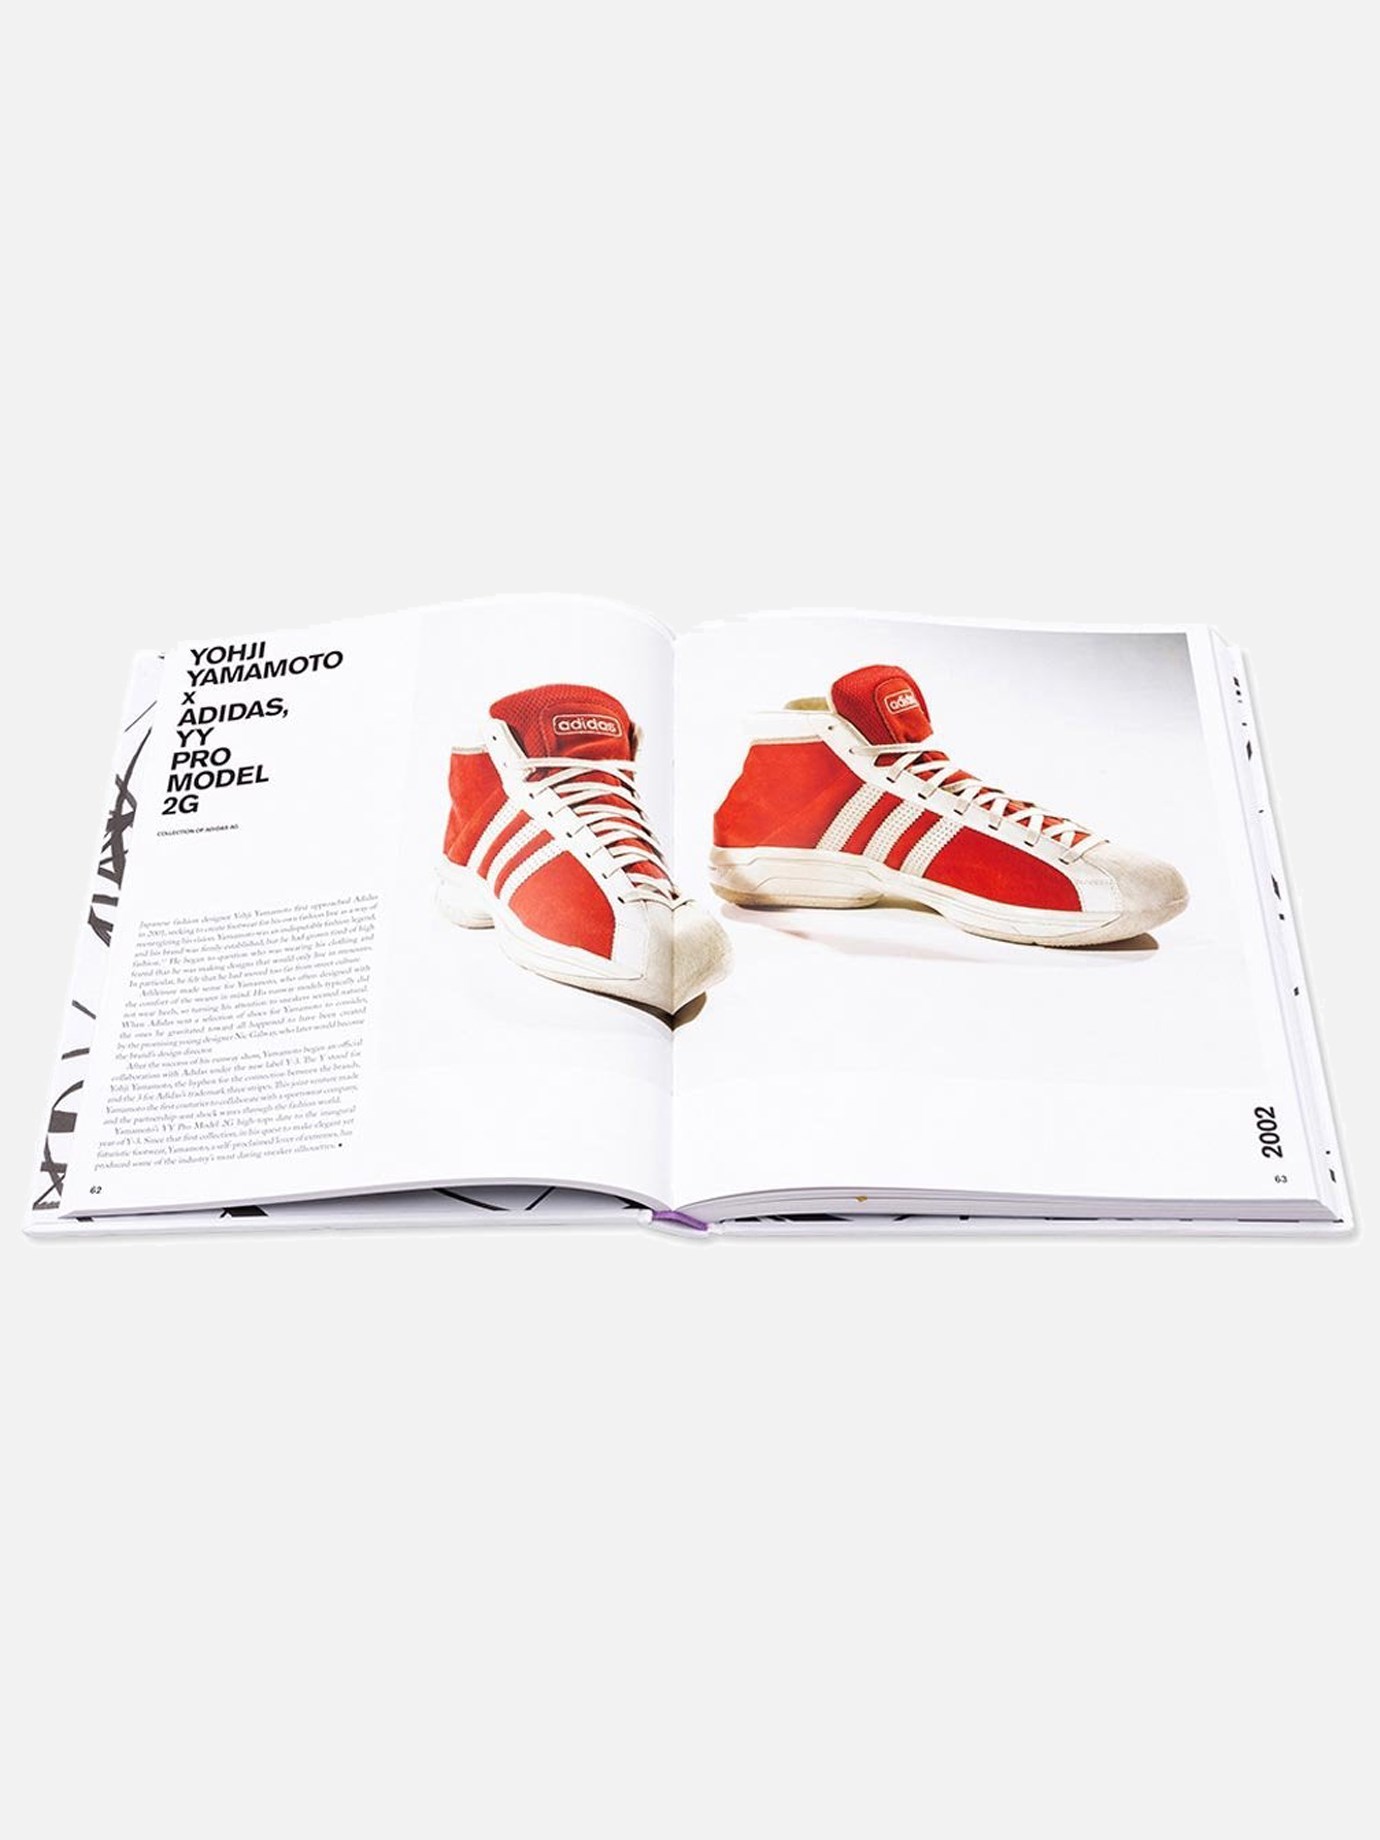 Rizzoli Sneakers x Culture: Collab. by Rizzoli